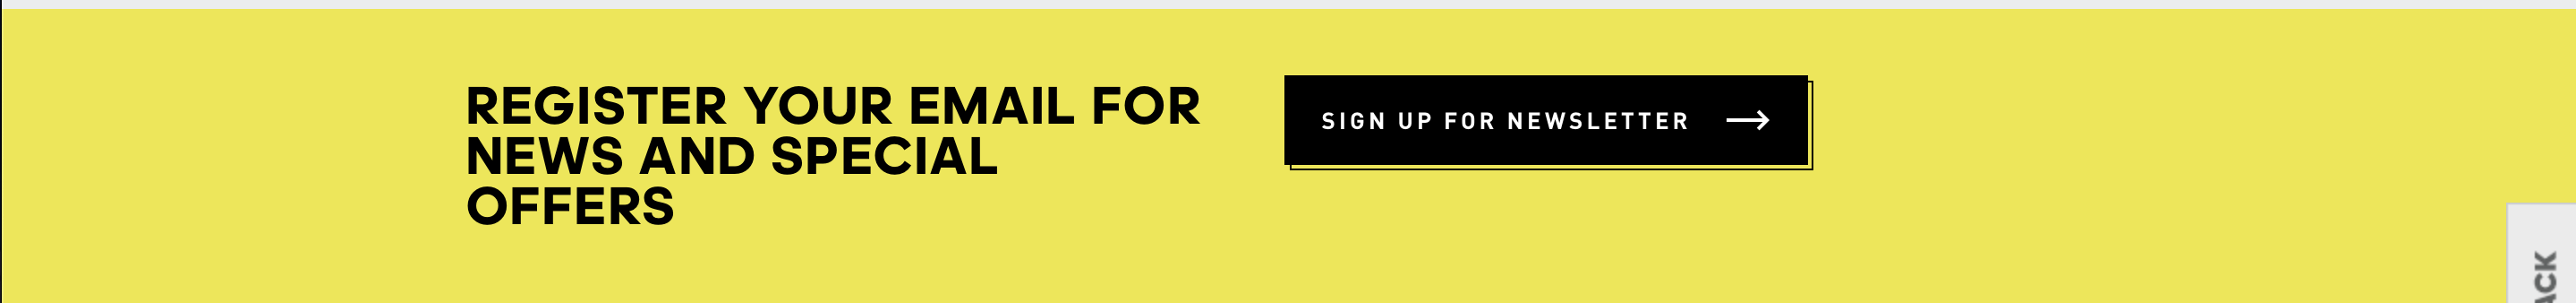 adidas email list sign up form